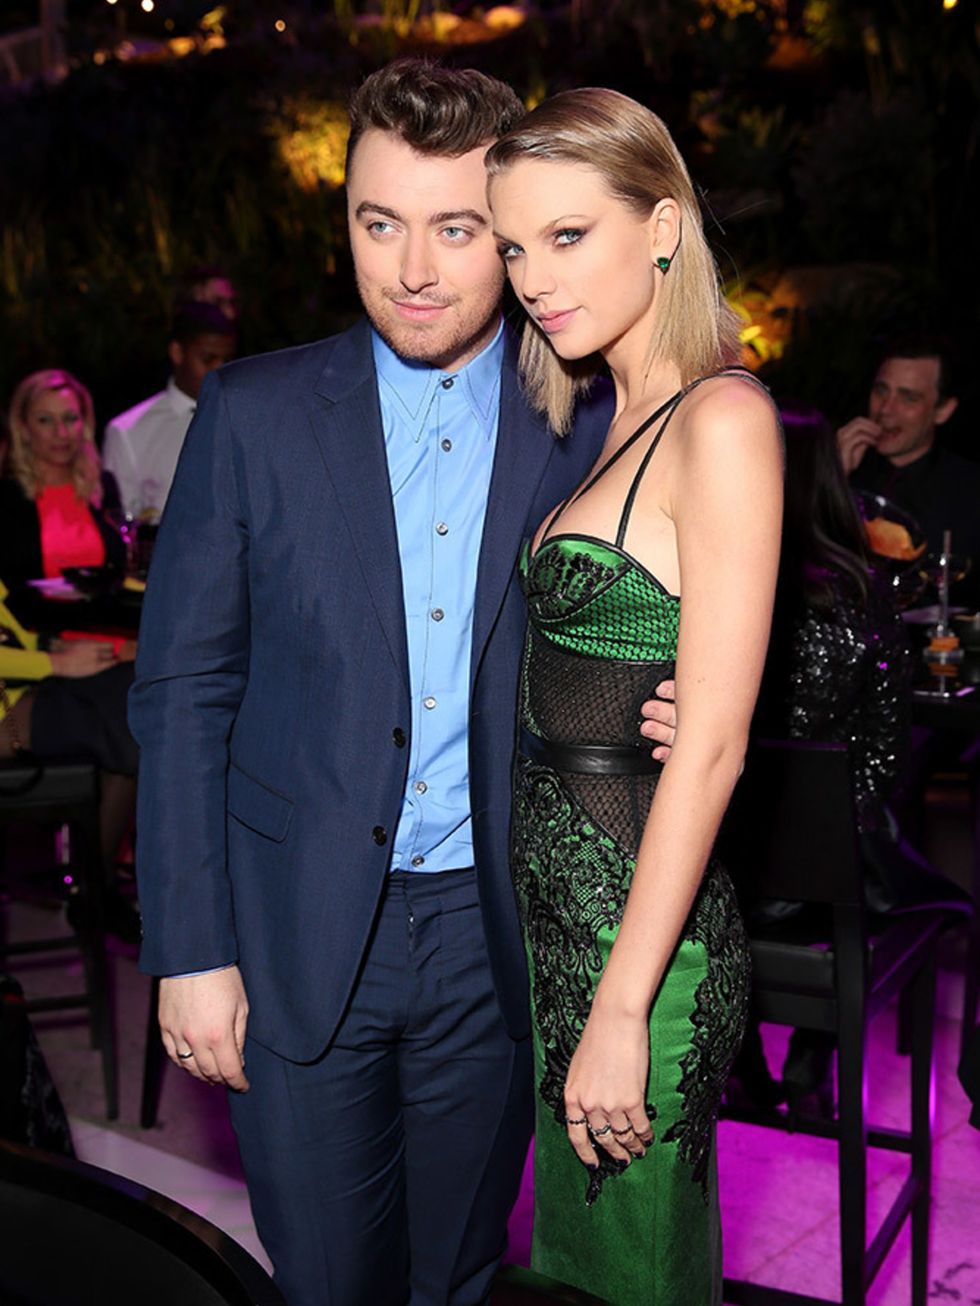 Taylor Swift and Sam Smith at the ELLE Style Awards after party, London, February 2015.